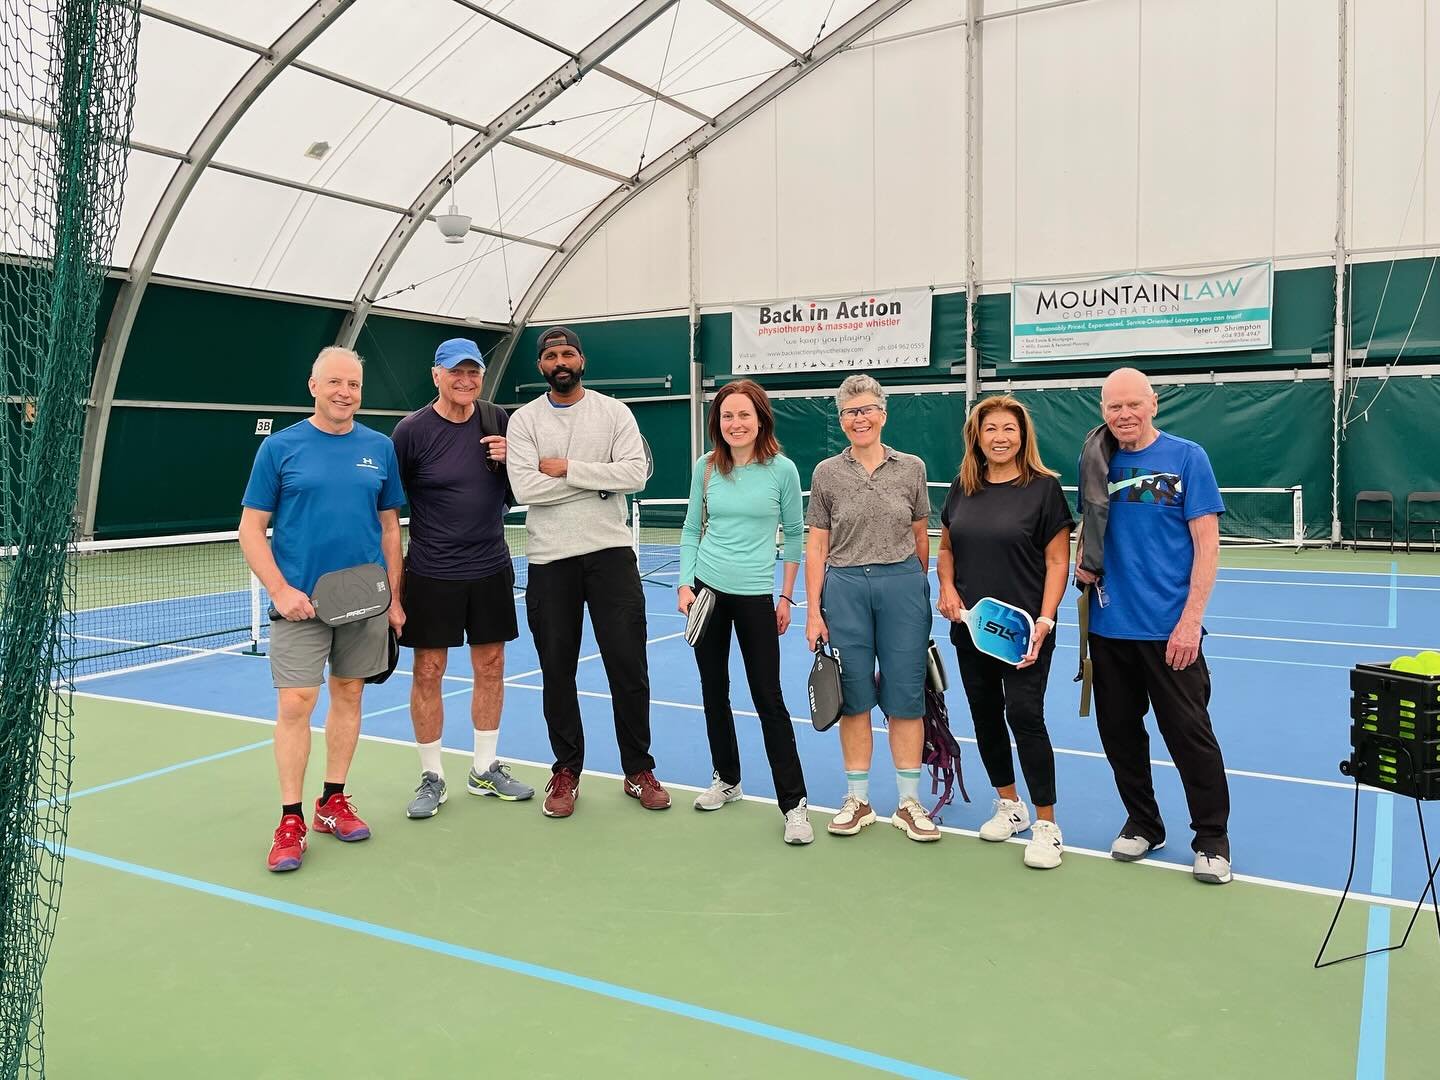 Coach Gowtham + Les on court yesterday with some of our Match Tough players!💙

Match Tough clinics are your one way ticket to taking your game to the next level! With different themes and objectives in each session, you will become a smarter + more 